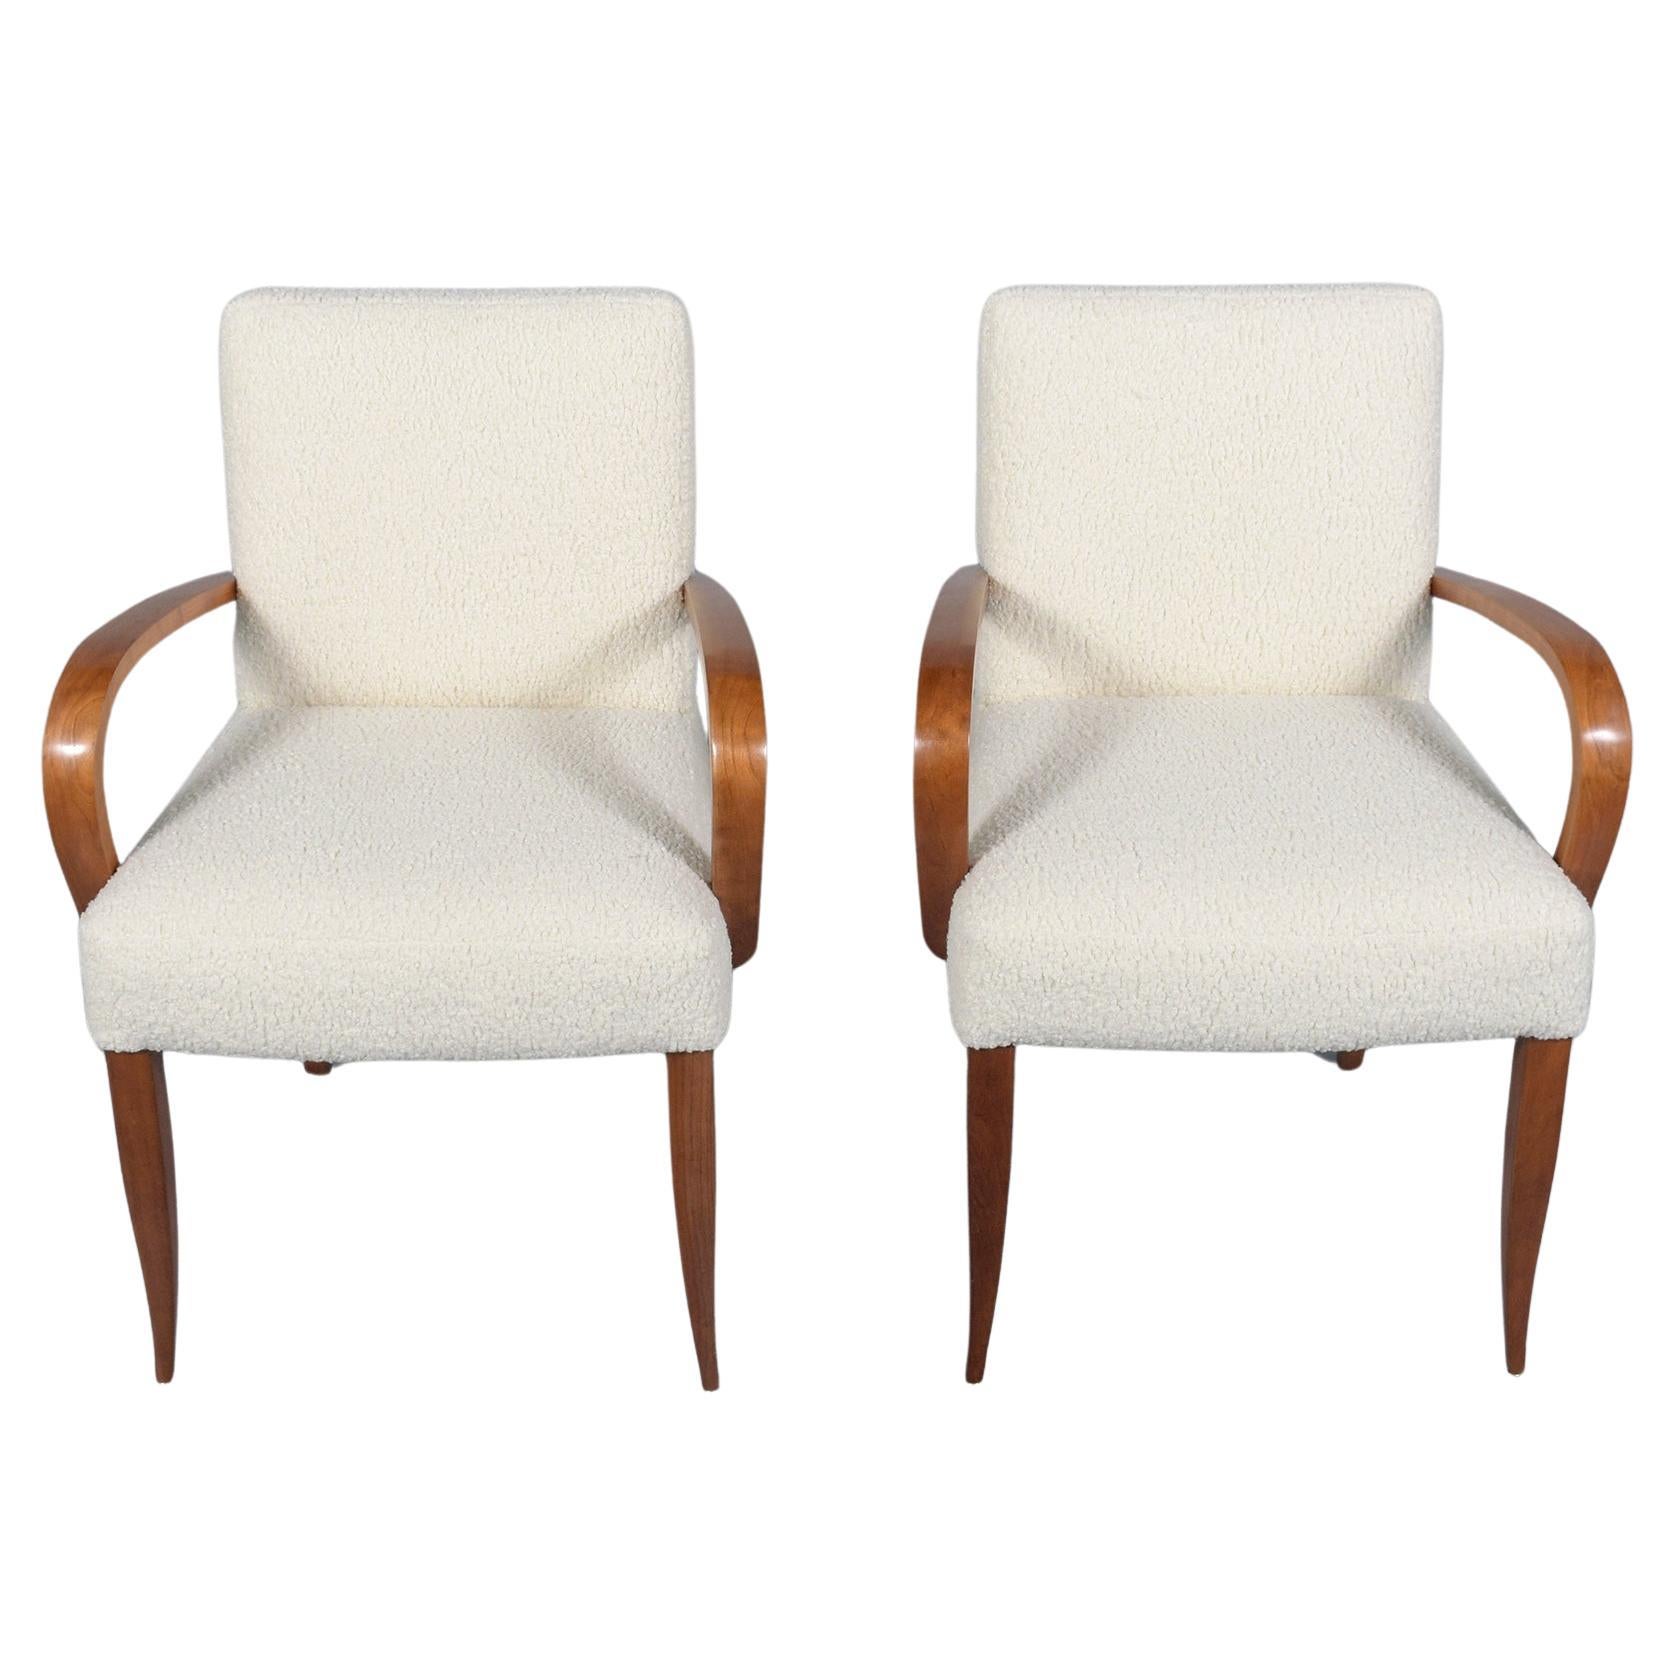 Pair of Mid-Century Modern Walnut Armchairs: Refined Elegance & Comfort For Sale